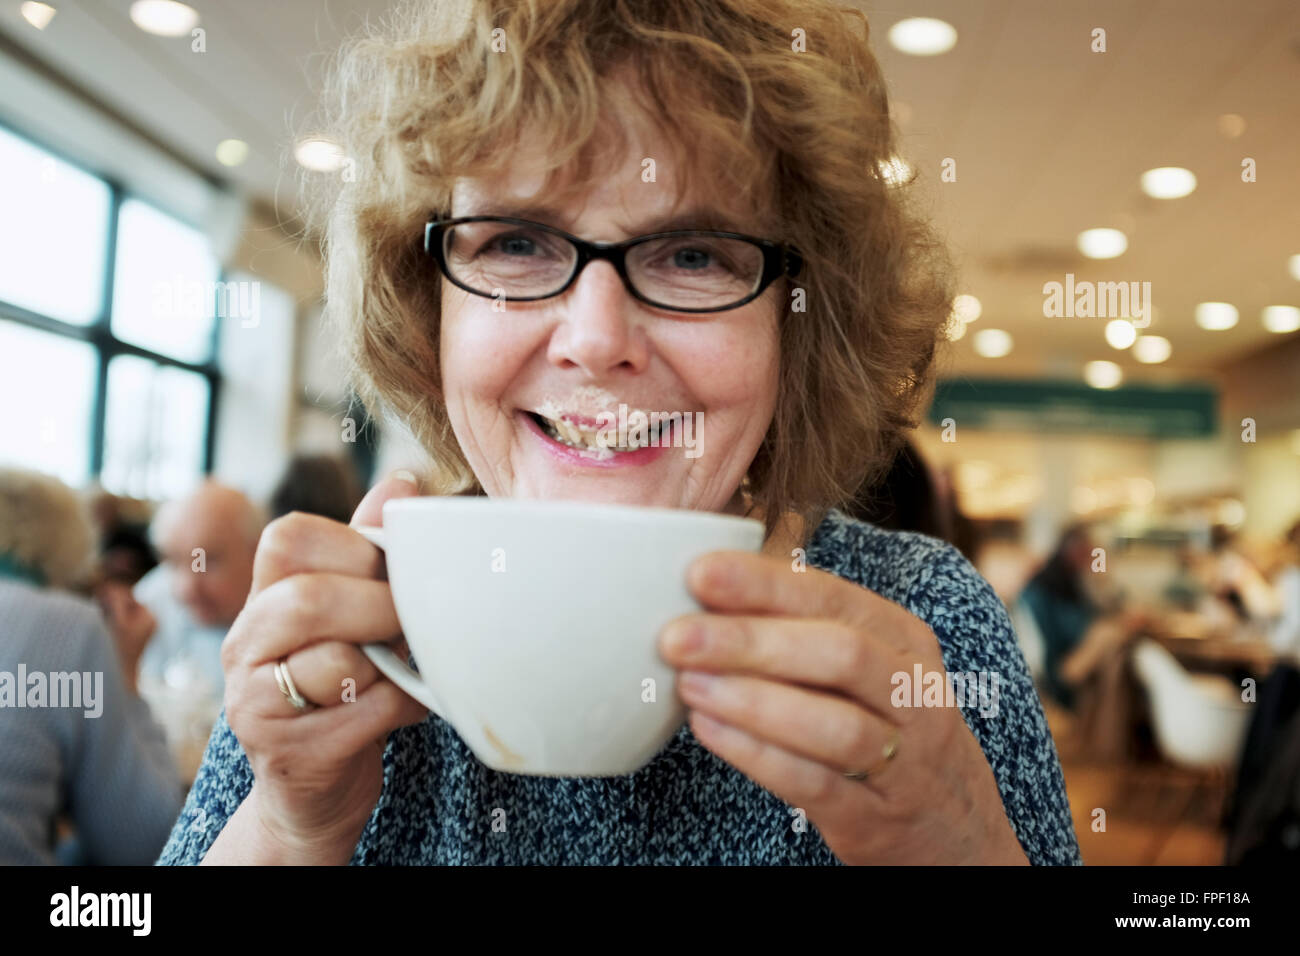 Middle aged woman enjoying a cup of cappuccino coffee in a cafe getting the cream on her lips and nose Stock Photo